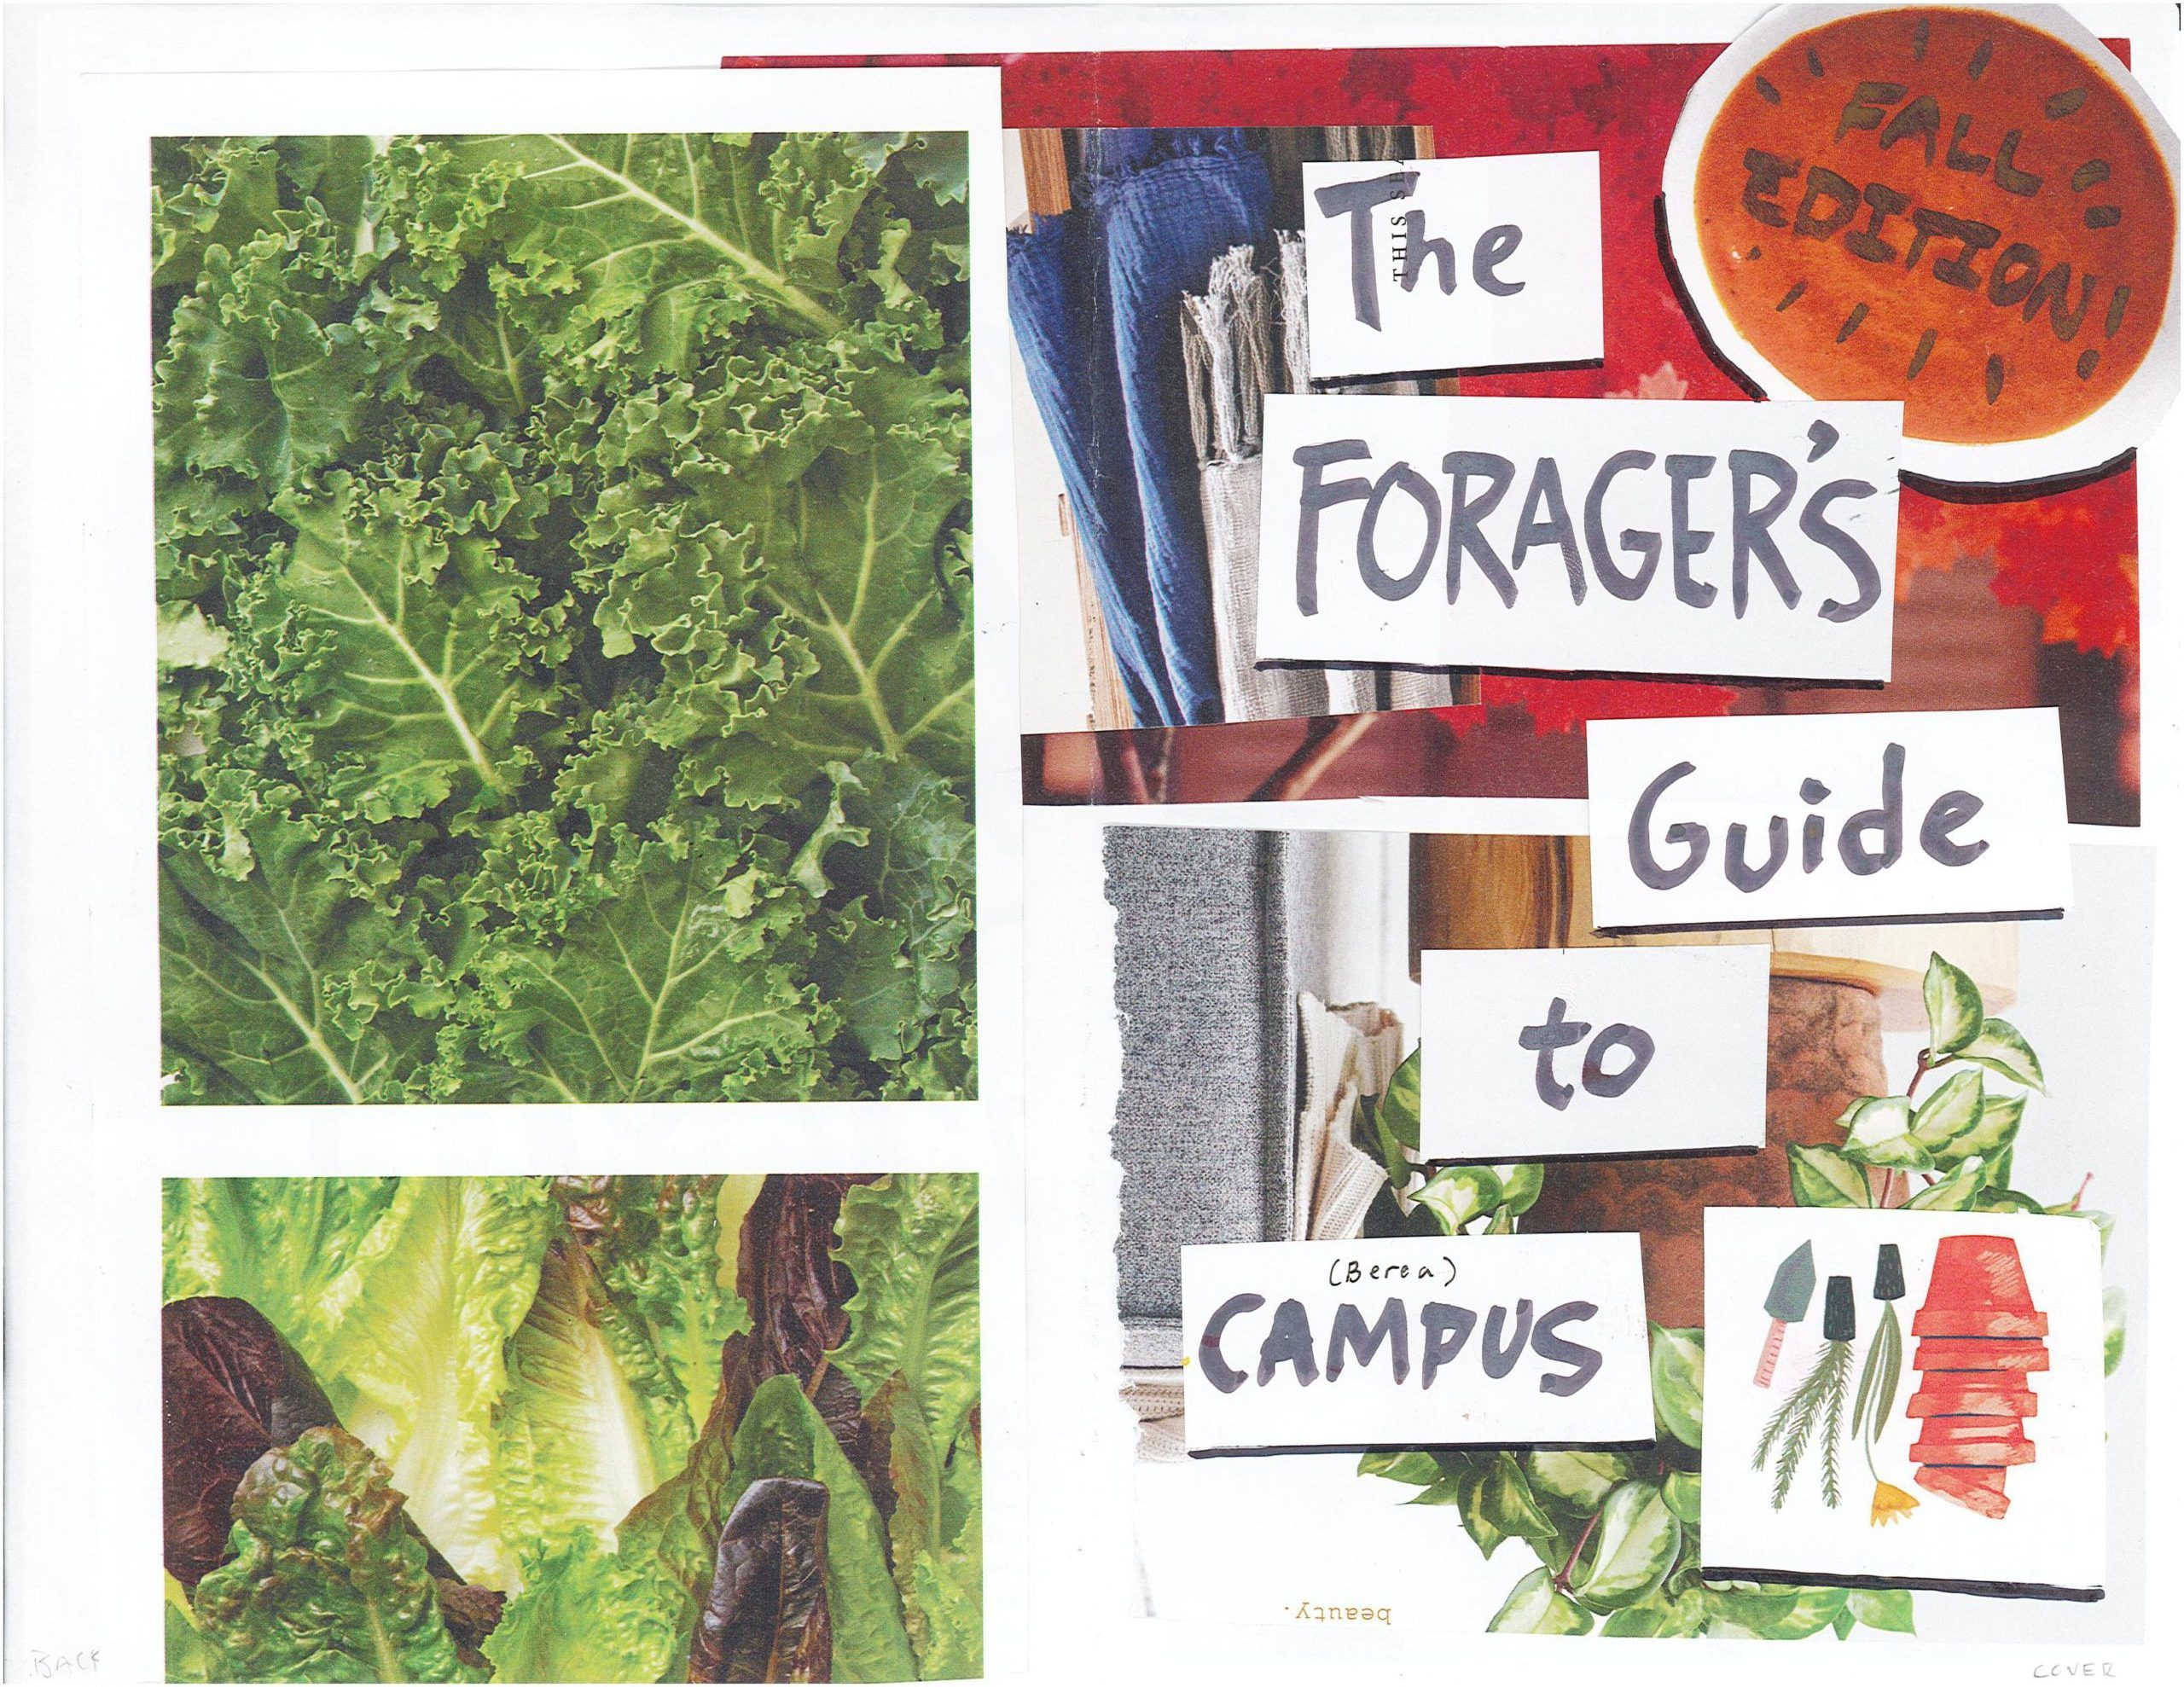 The cover of the zine "The Forager's Guide to Campus Fall Edition" with images of plants